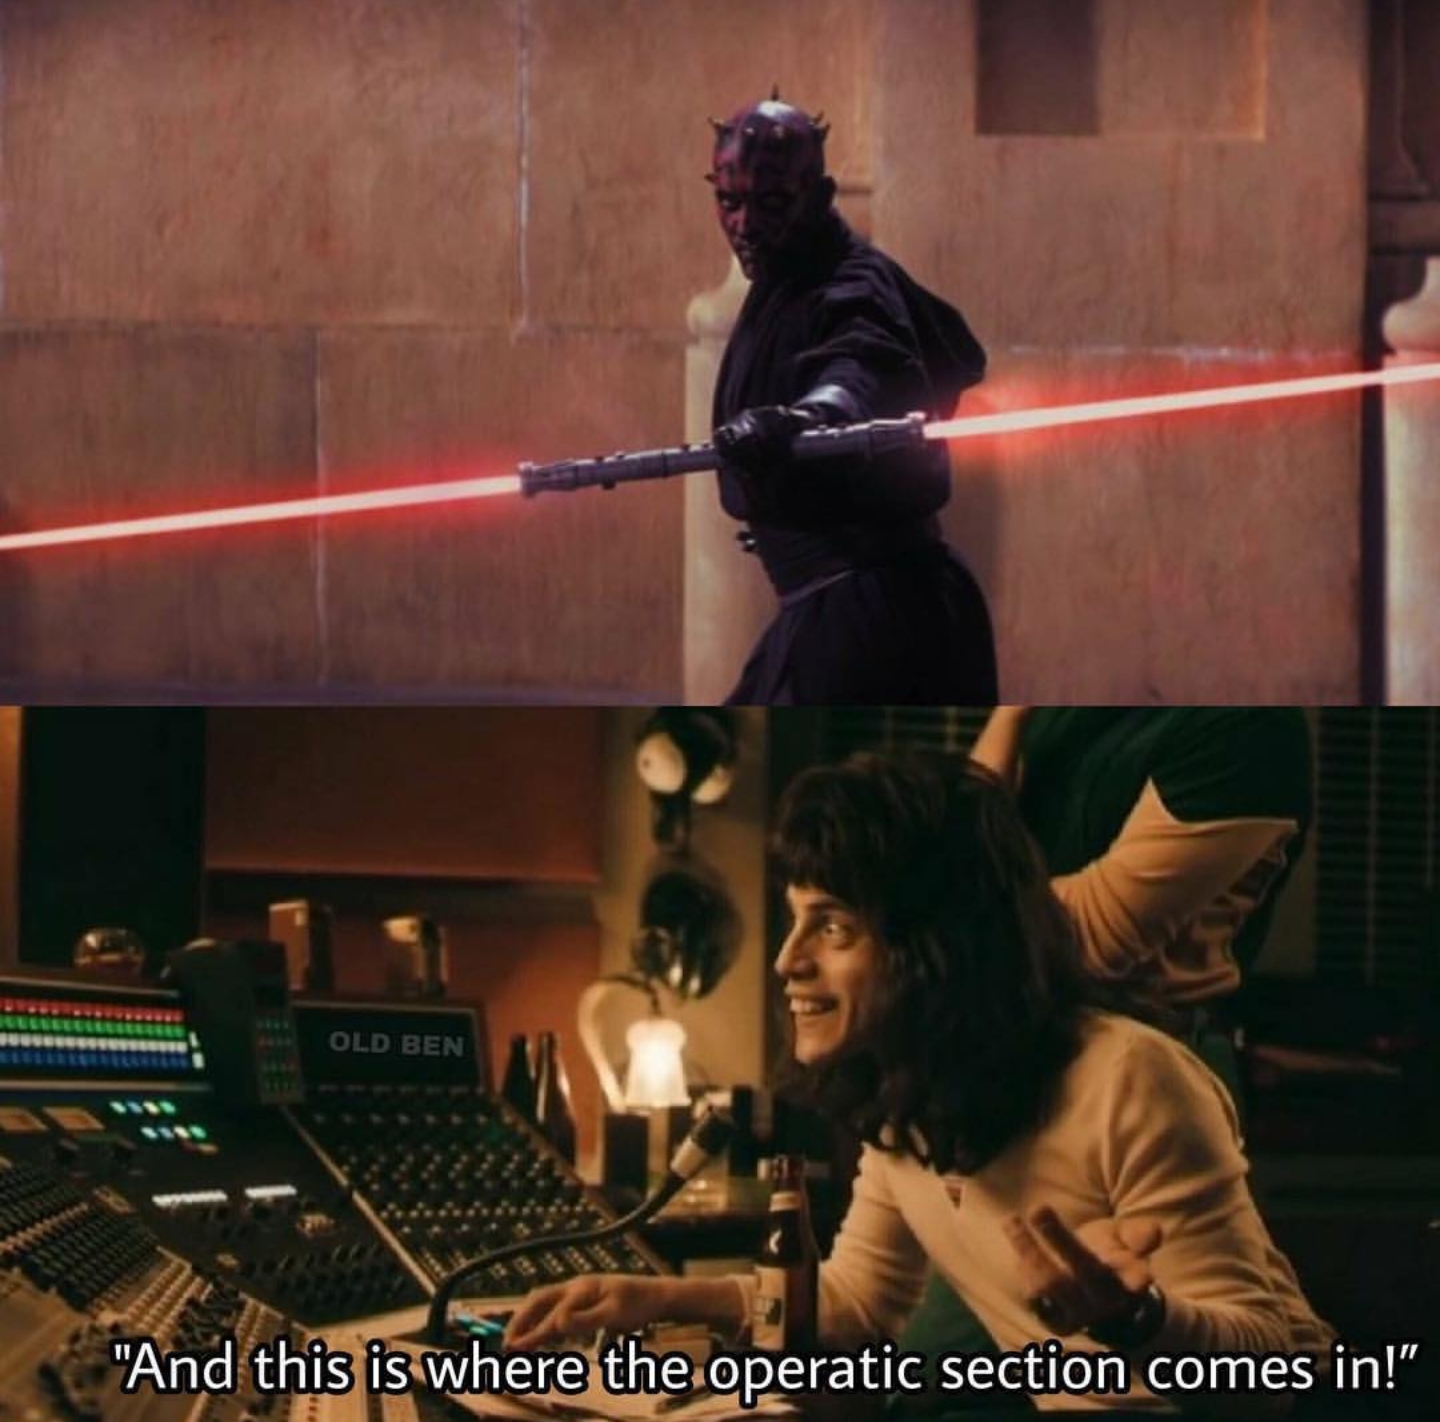 darth maul lightsaber meme - Old Ben "And this is where the operatic section comes in!"